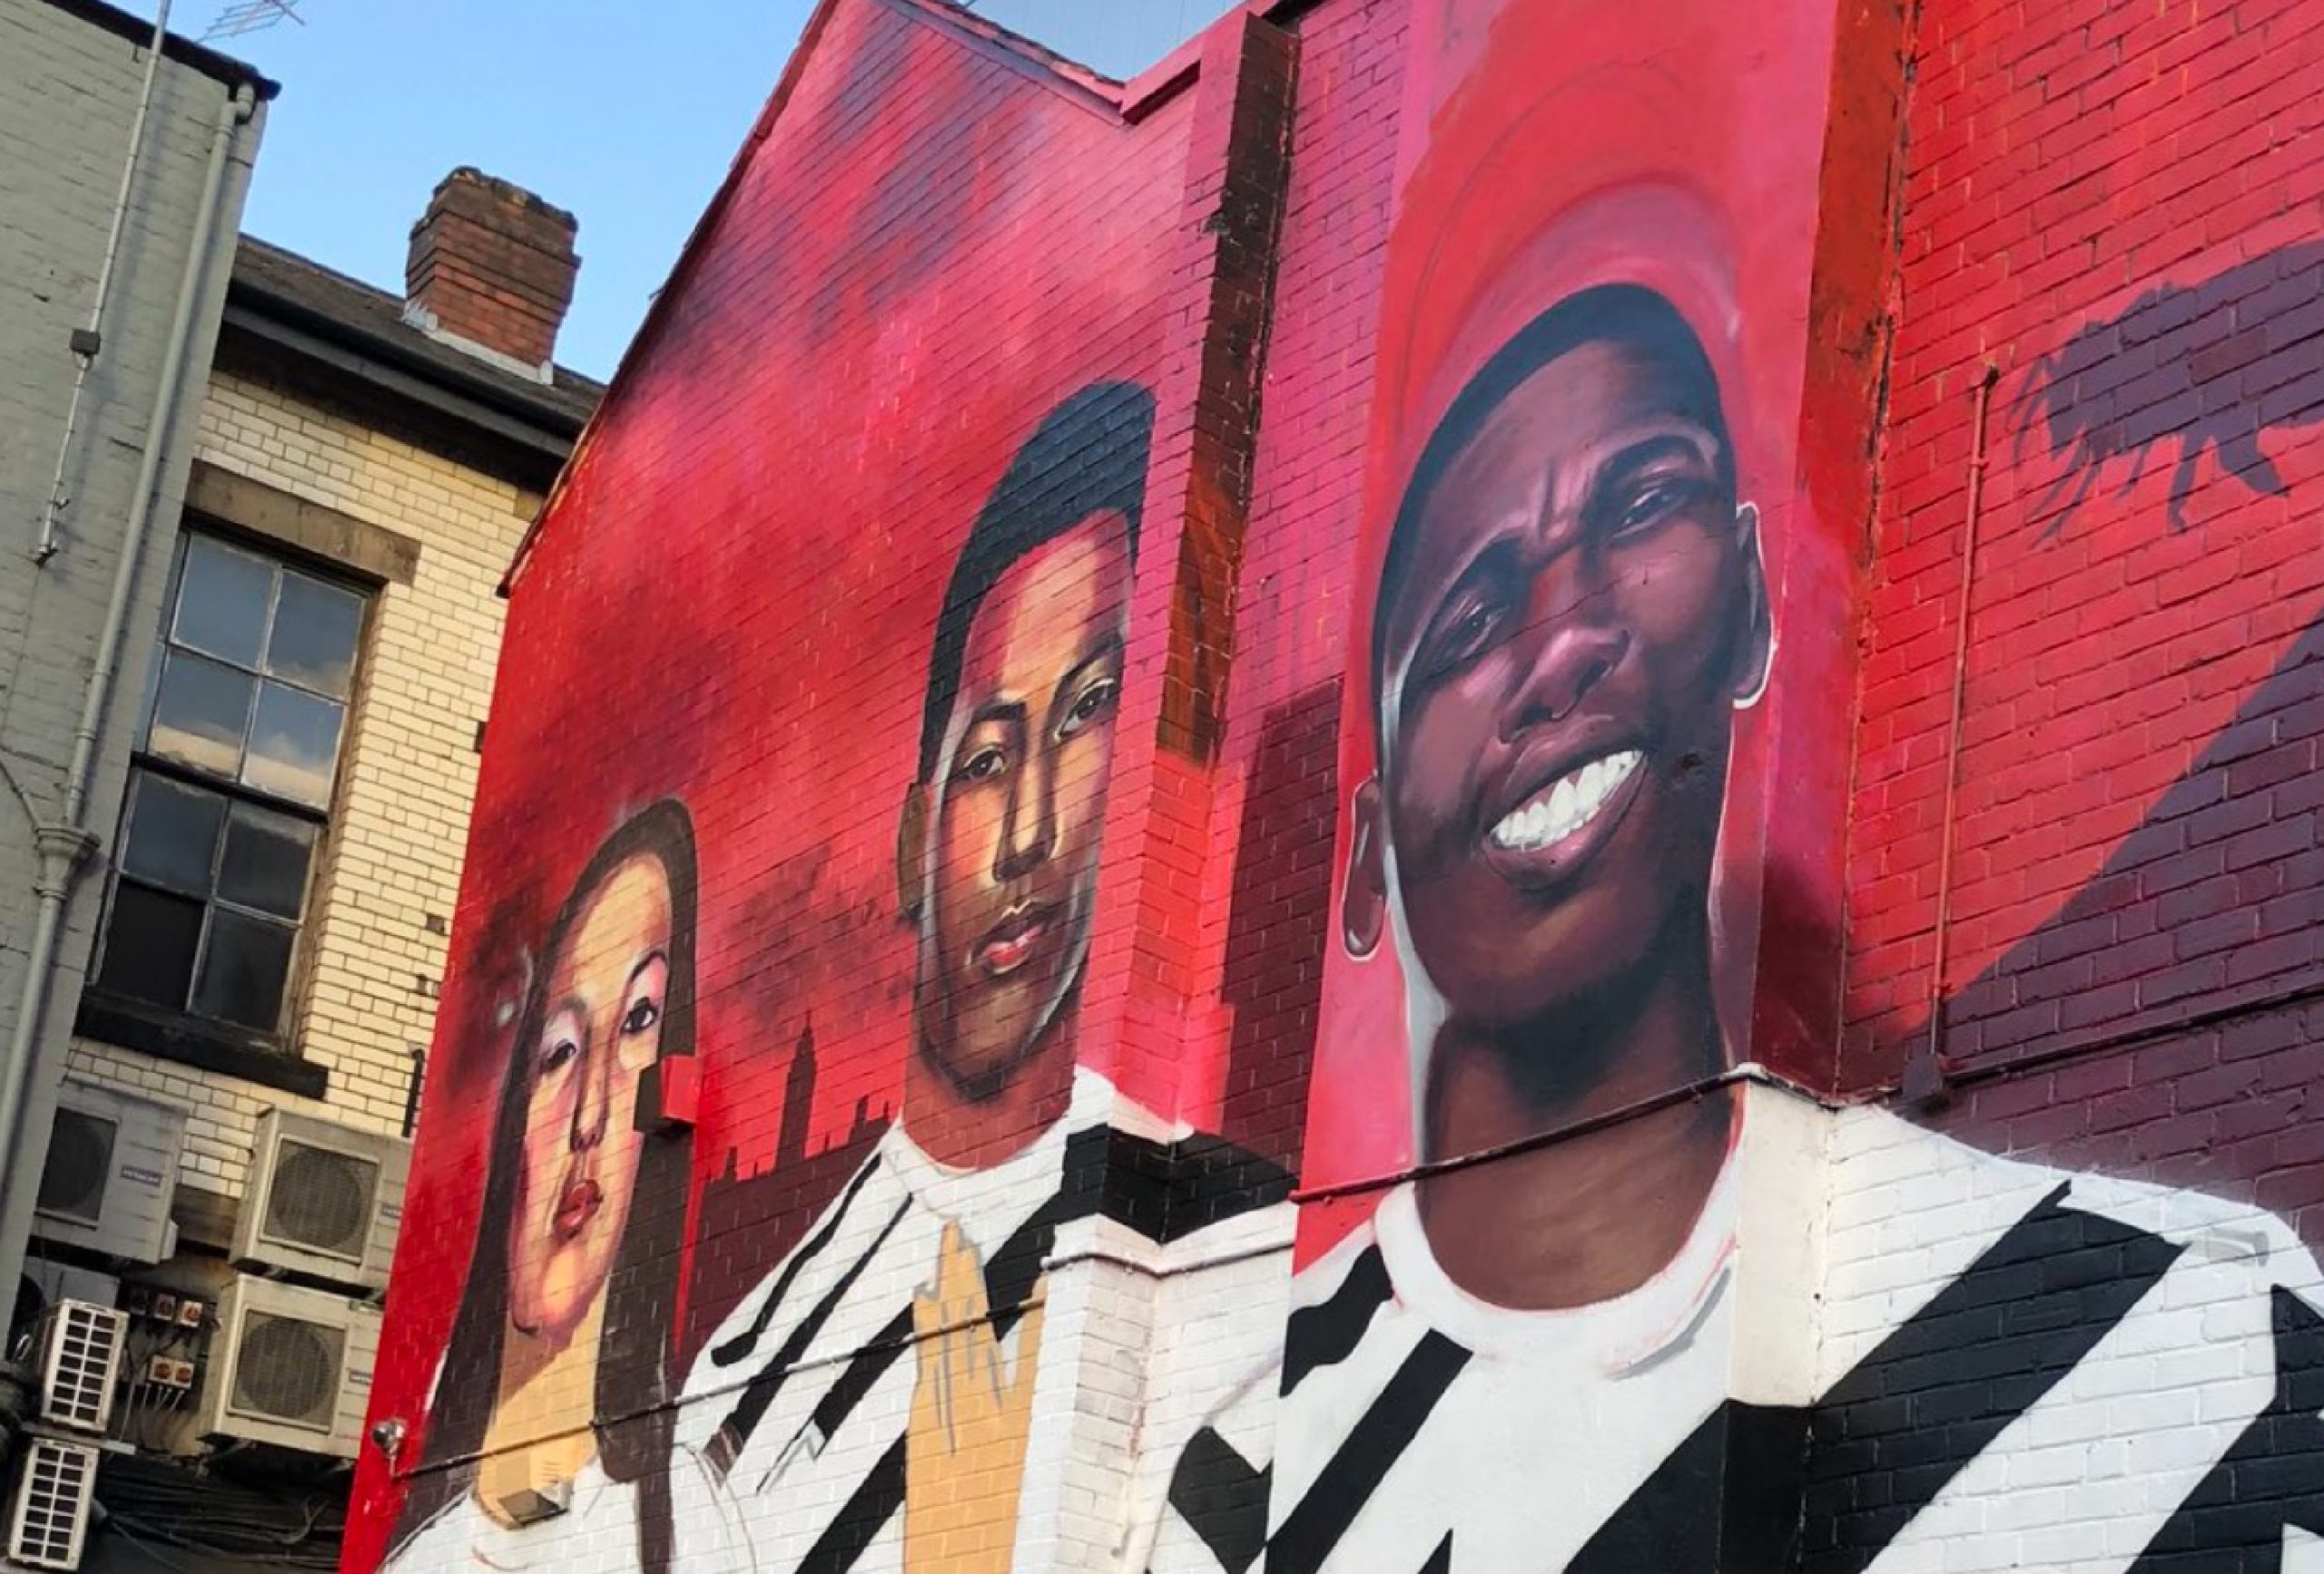 A god-awful mural of Marcus Rashford and Paul Pogba has been put up in